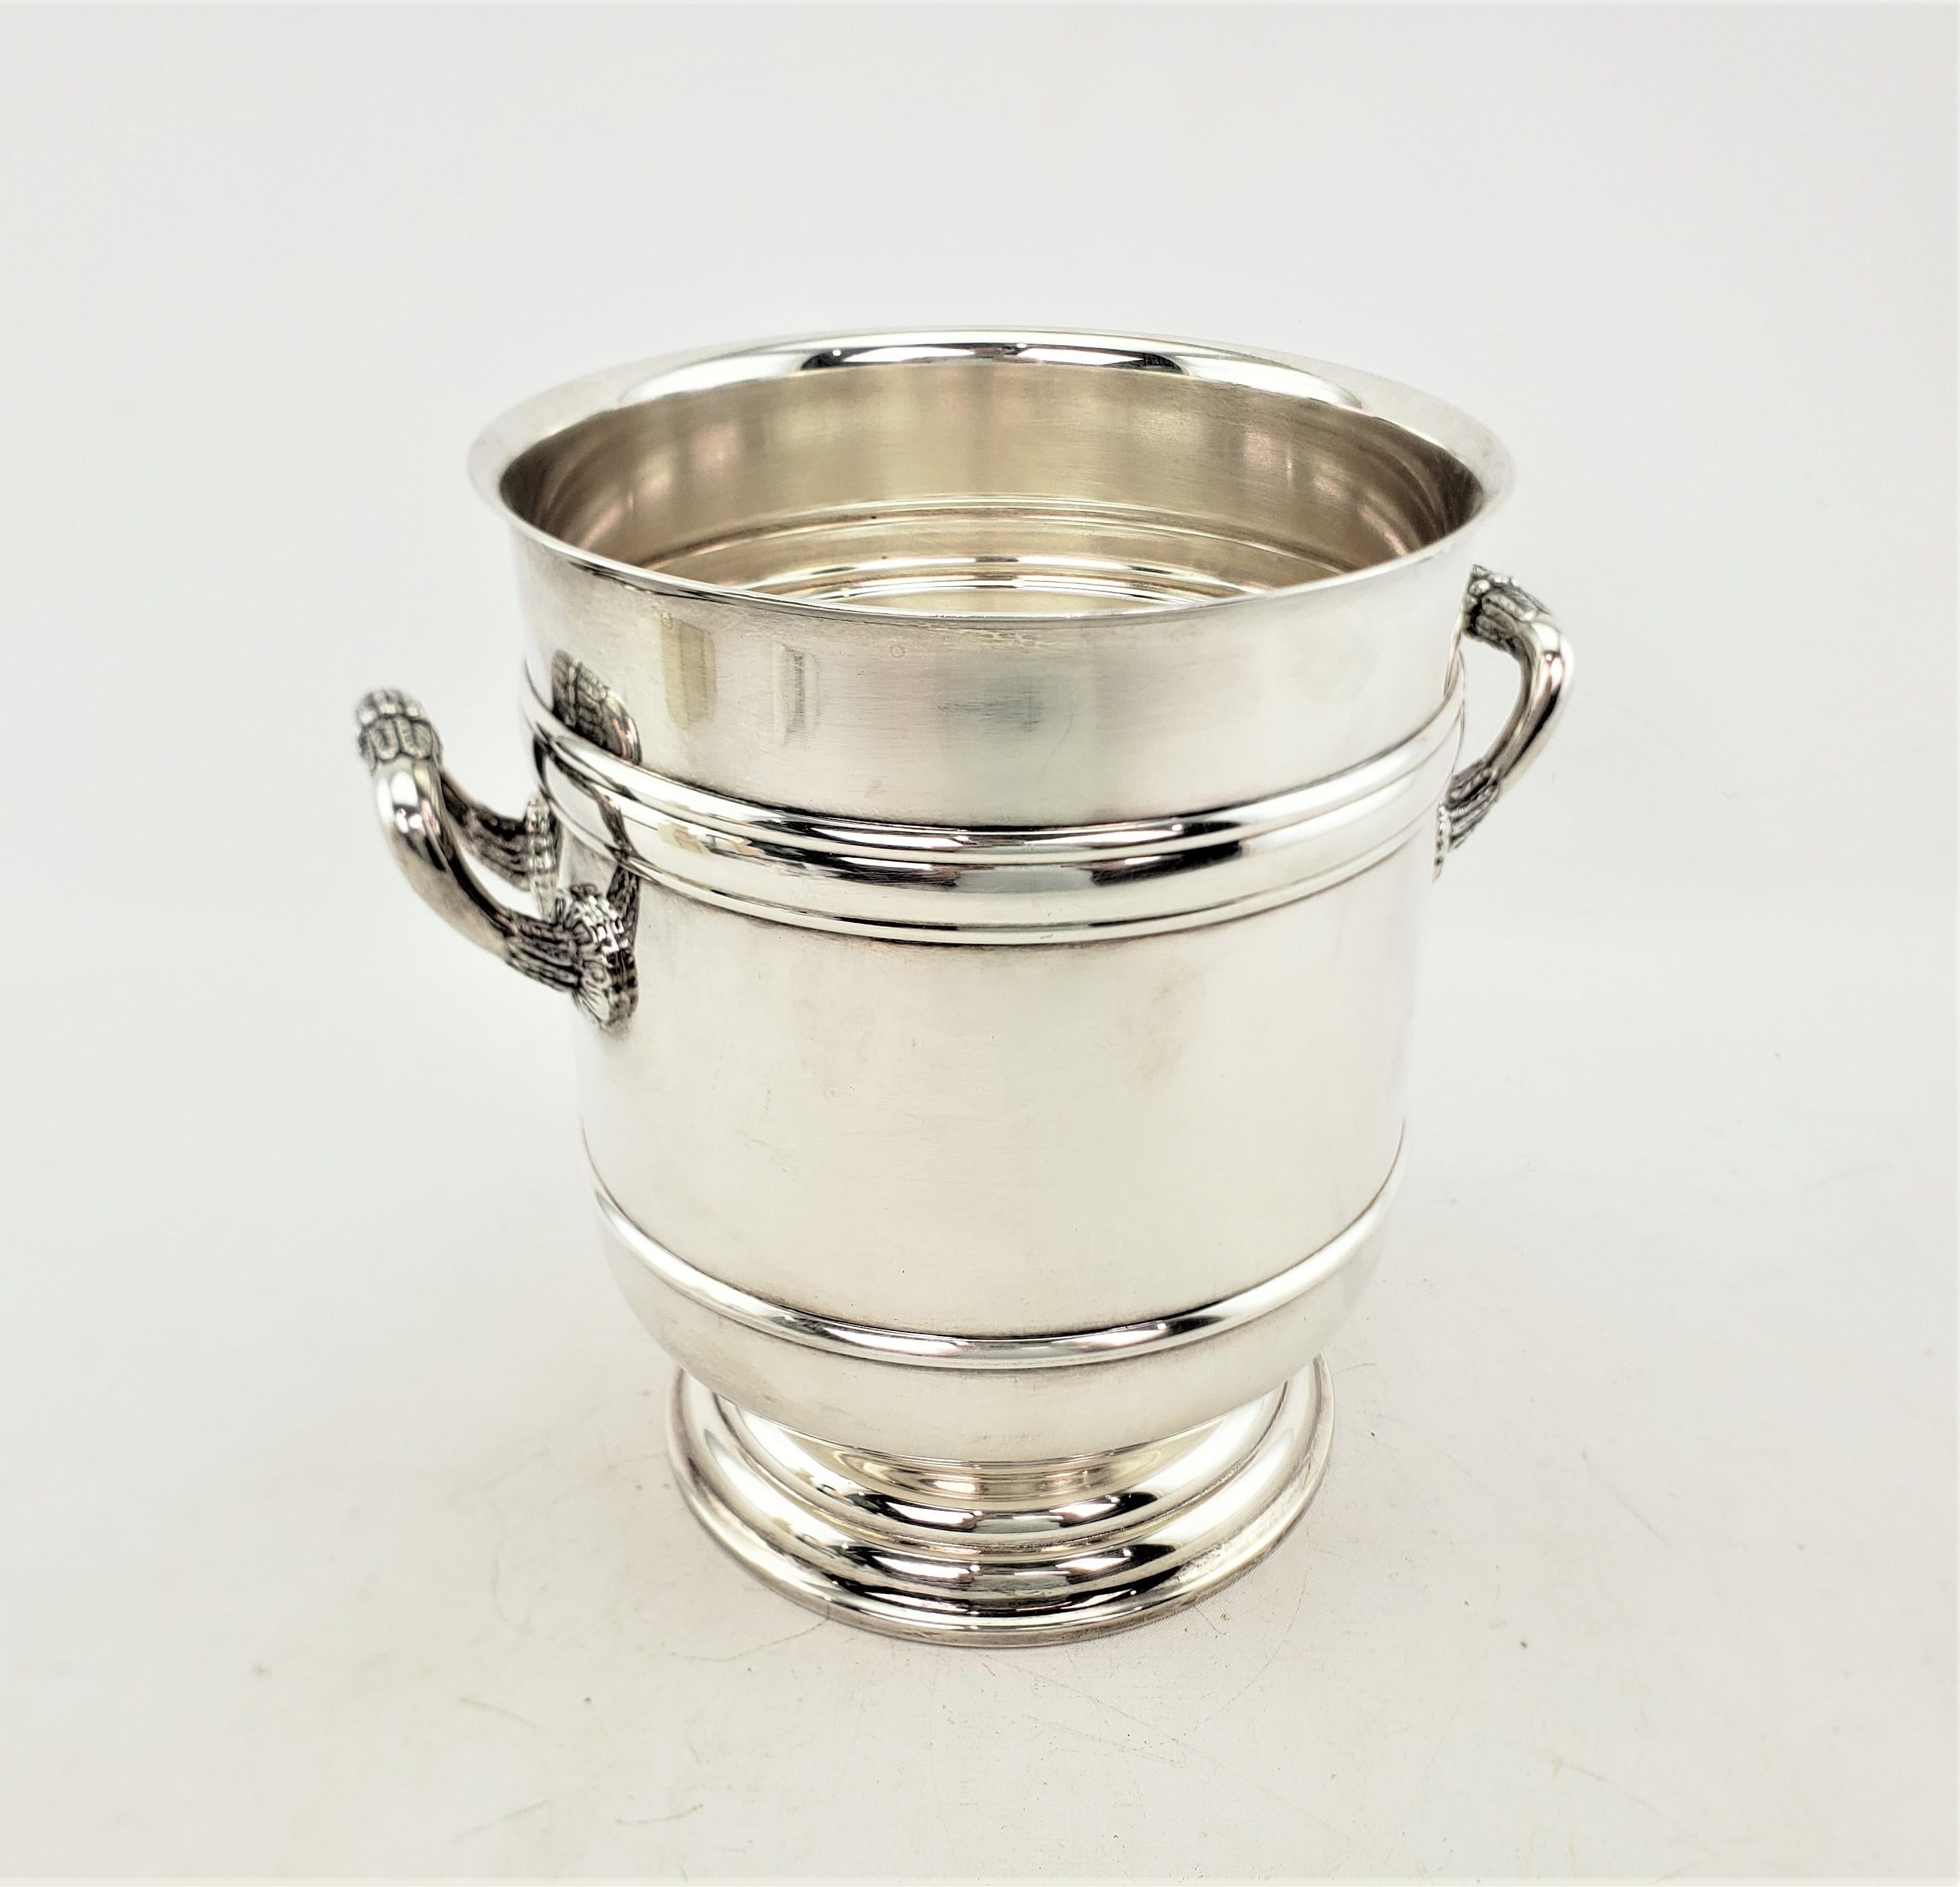 French Mid-Century Era Christofle Silver Plated Ice Bucket or Bottle Chiller For Sale